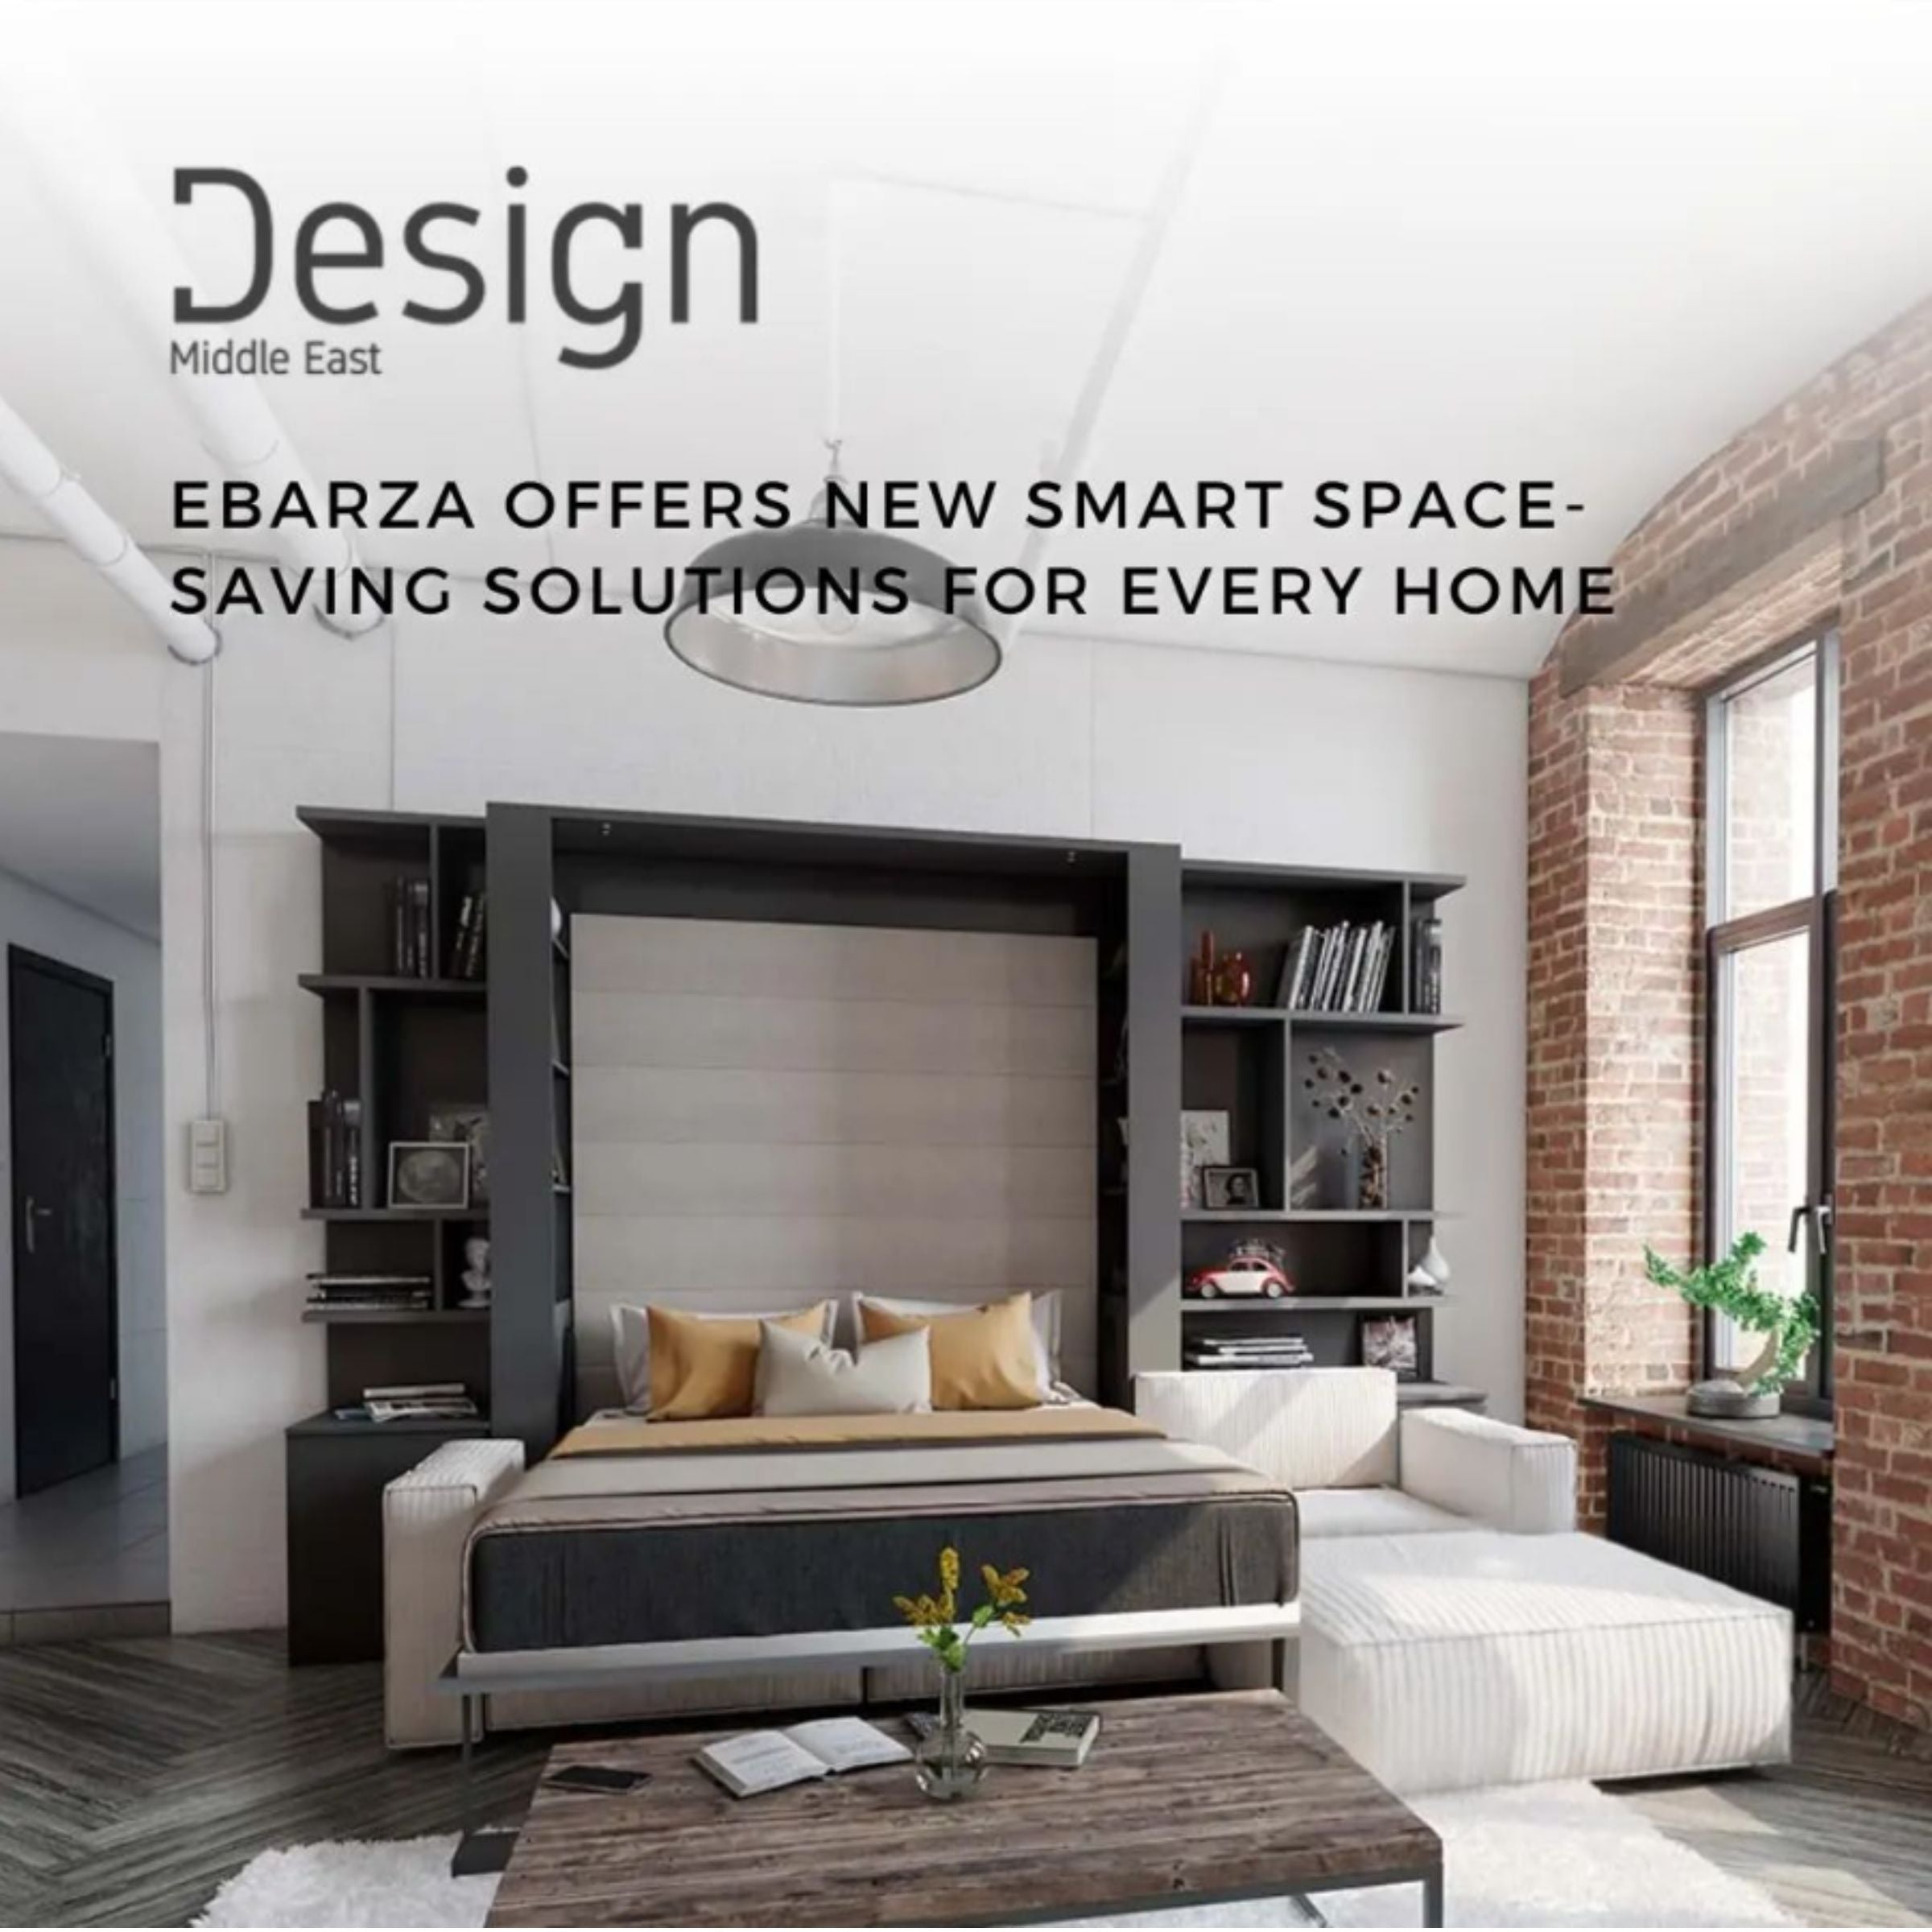 Ebarza offers new smart space-saving solutions for every home